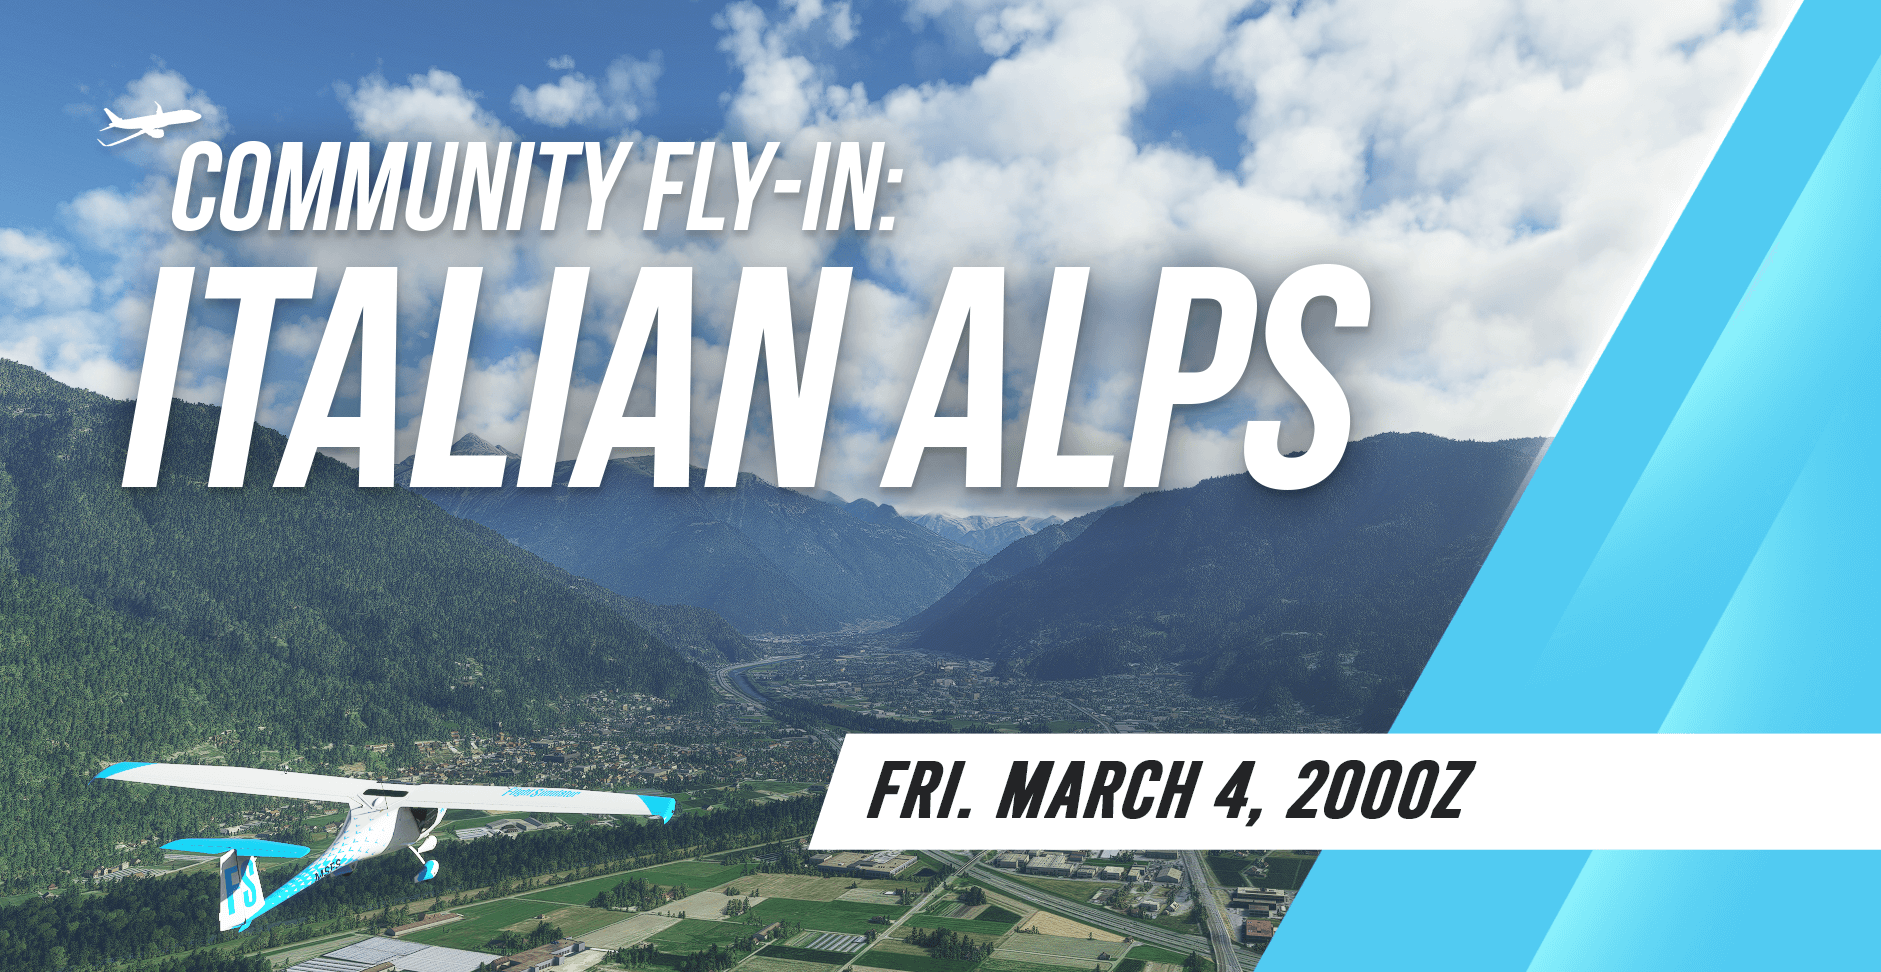 Community Fly in on March 4th at 2000Z - Italian Alps